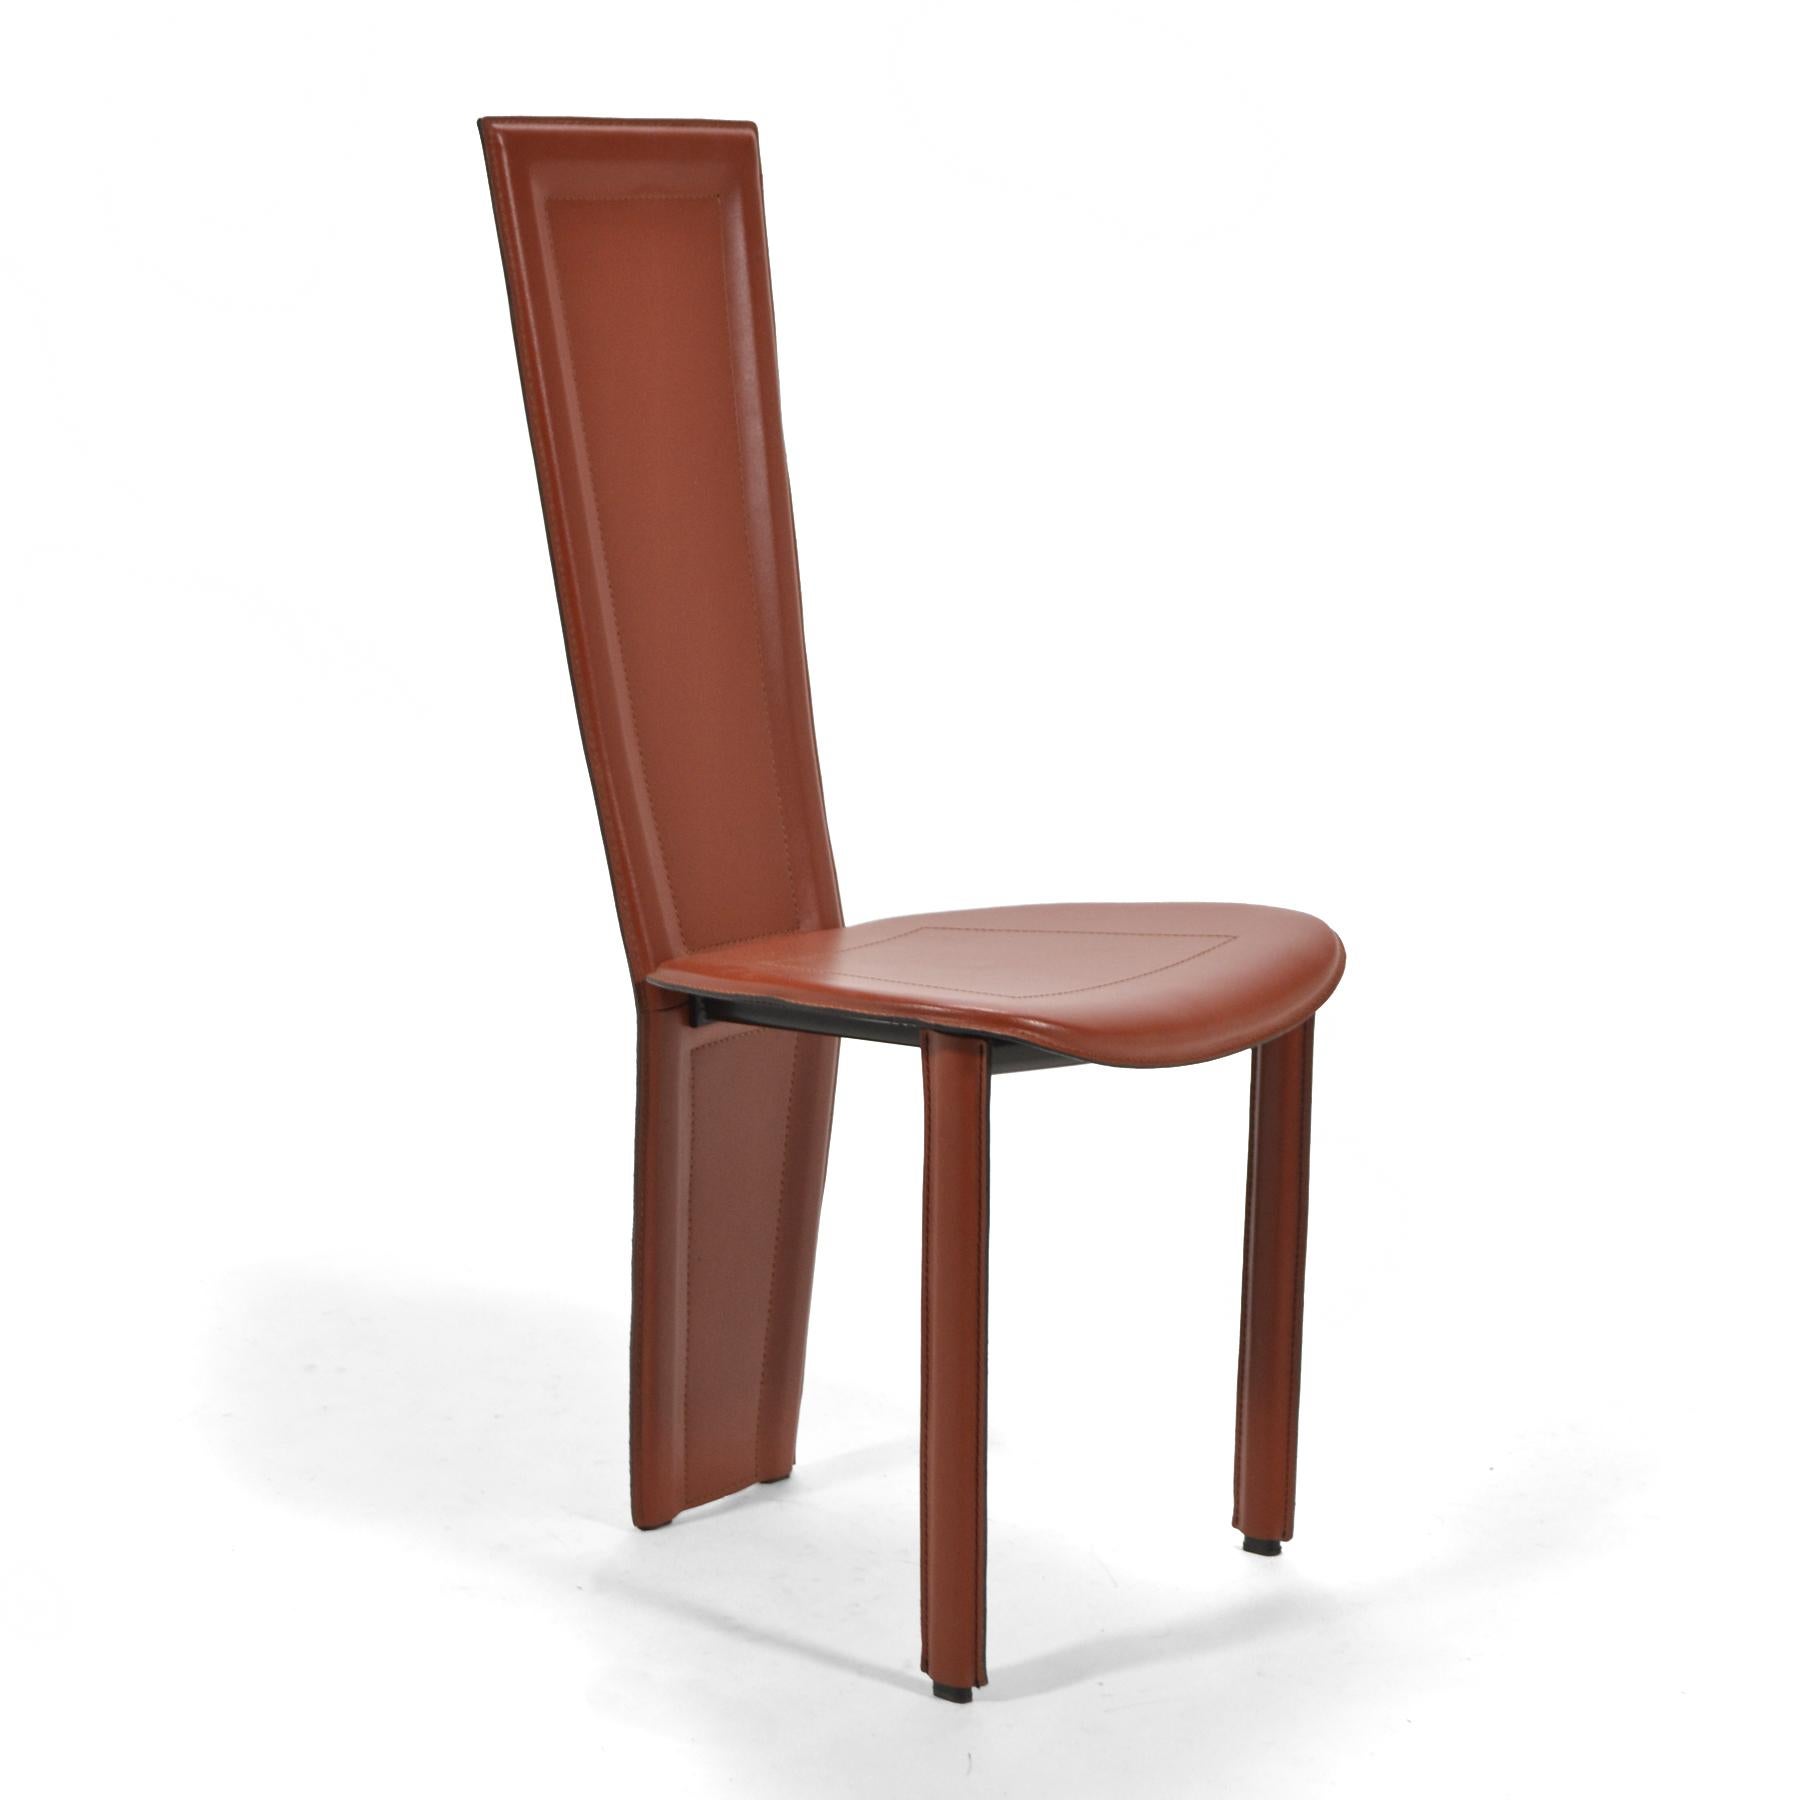 Italian high-style post-modern design, these eight sienna colored leather chairs are elegant and uncommon. Possibly designed by Pietro Costantini, the chairs share qualities with designs by Frank Lloyd Wright and Mario Bellini. The chairs have steel